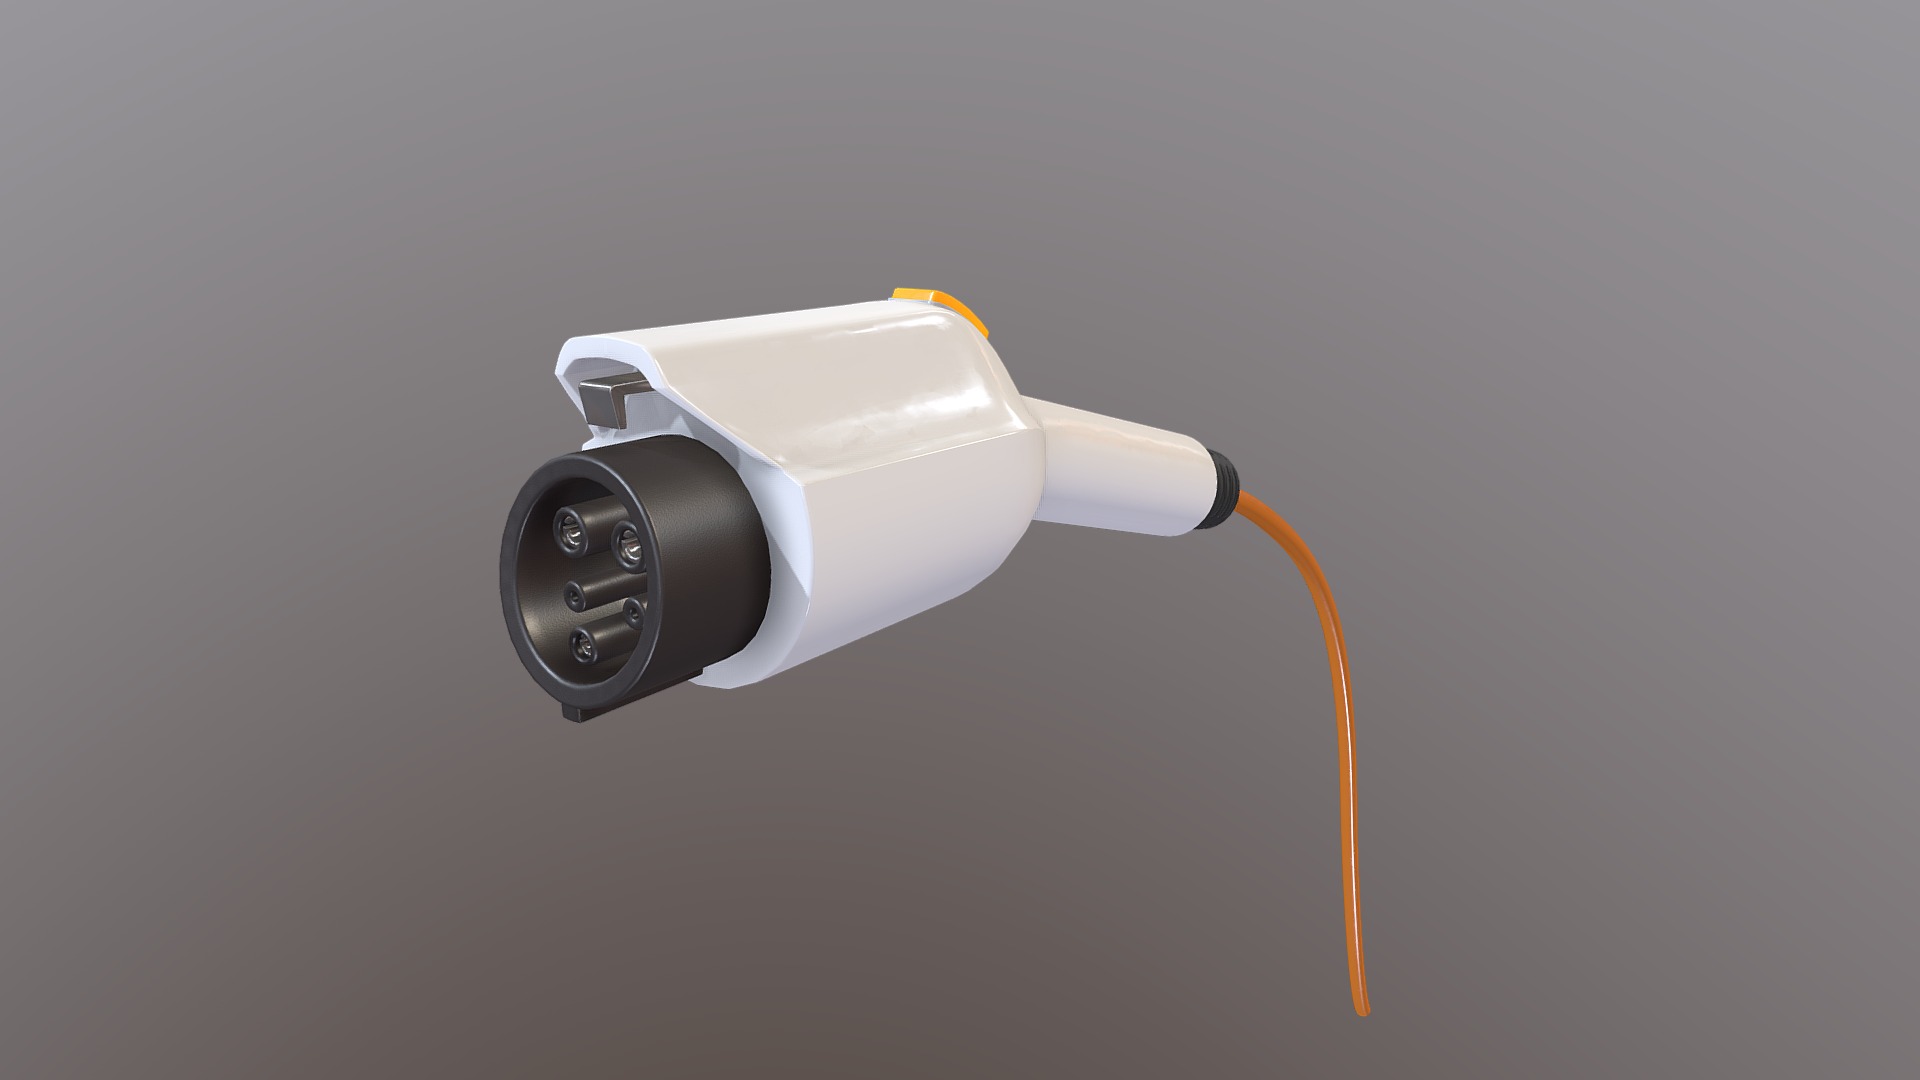 3D model Electric car charging plug - This is a 3D model of the Electric car charging plug. The 3D model is about a white and black cylindrical object.